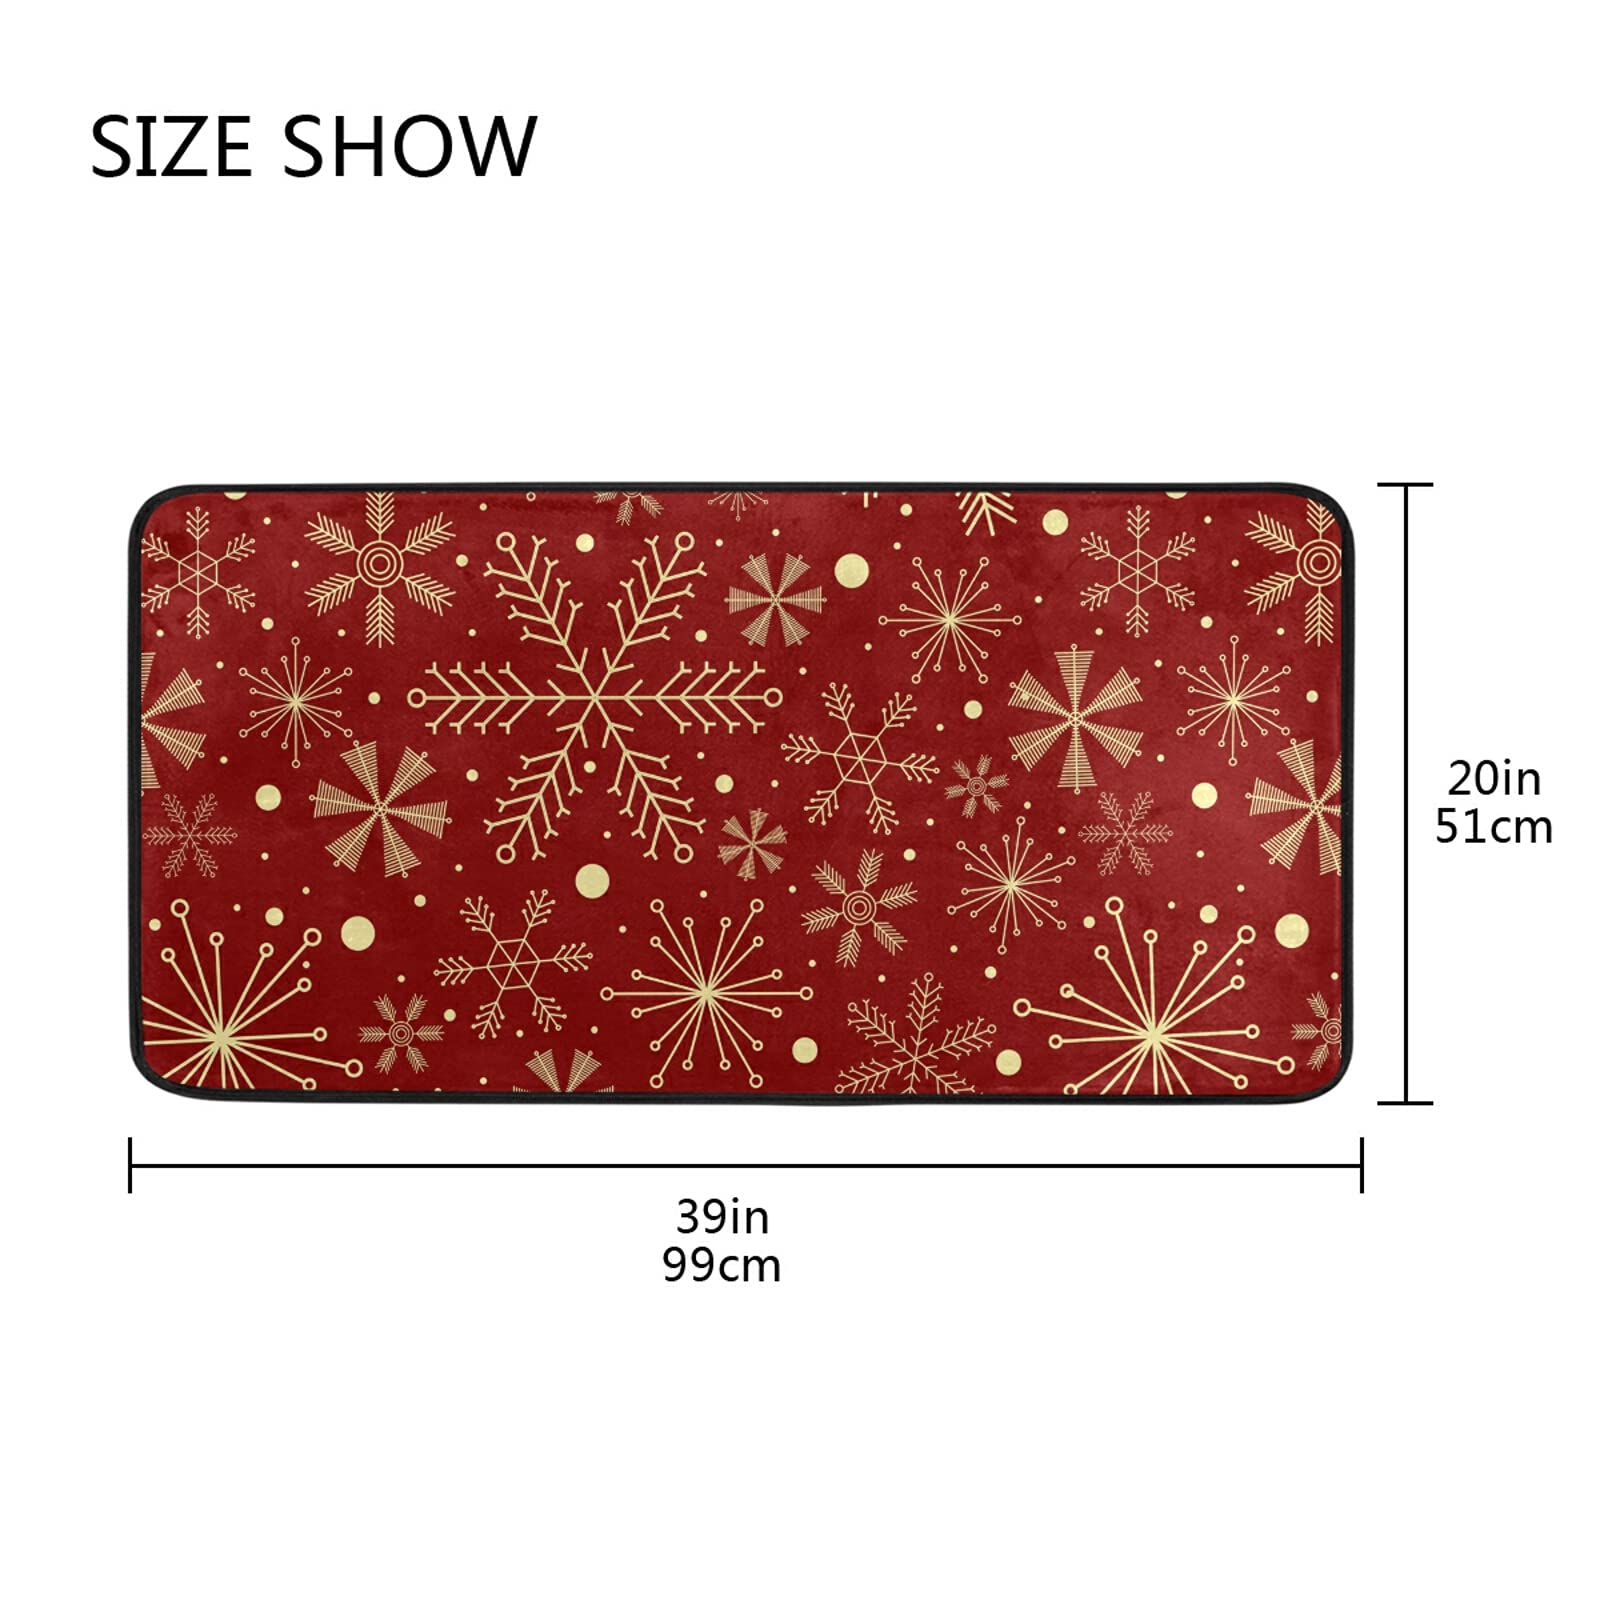 Christmas Rugs Christmas Snowflakes On Dark Red Rugs for Kitchen Bathroom Christmas Decorative Doormat Small Carpet Mat 39 x 20 inch